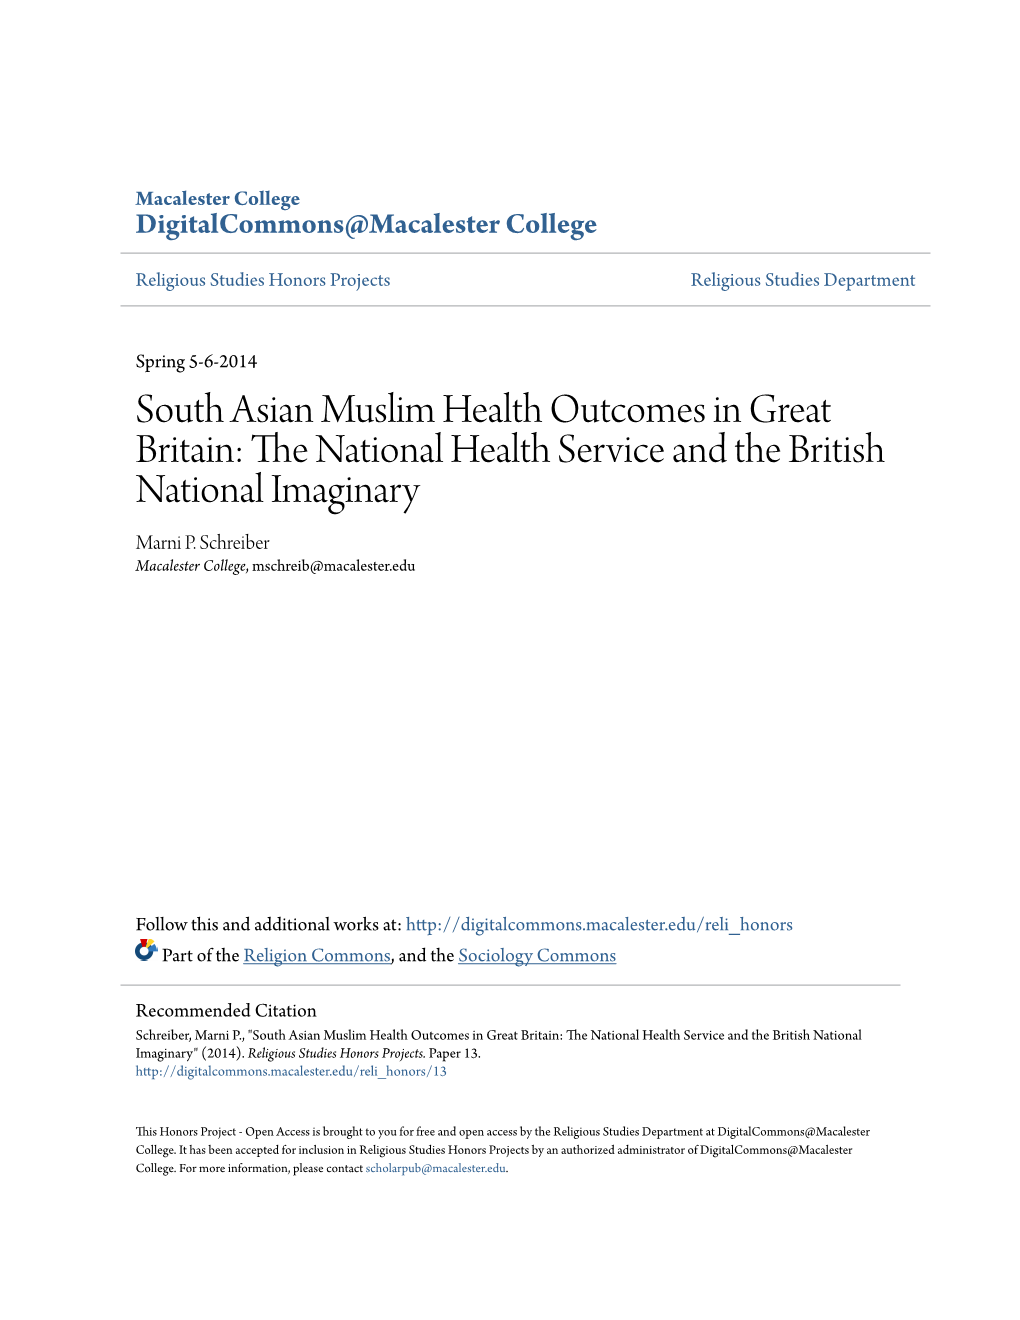 South Asian Muslim Health Outcomes in Great Britain: the an Tional Health Service and the British National Imaginary Marni P